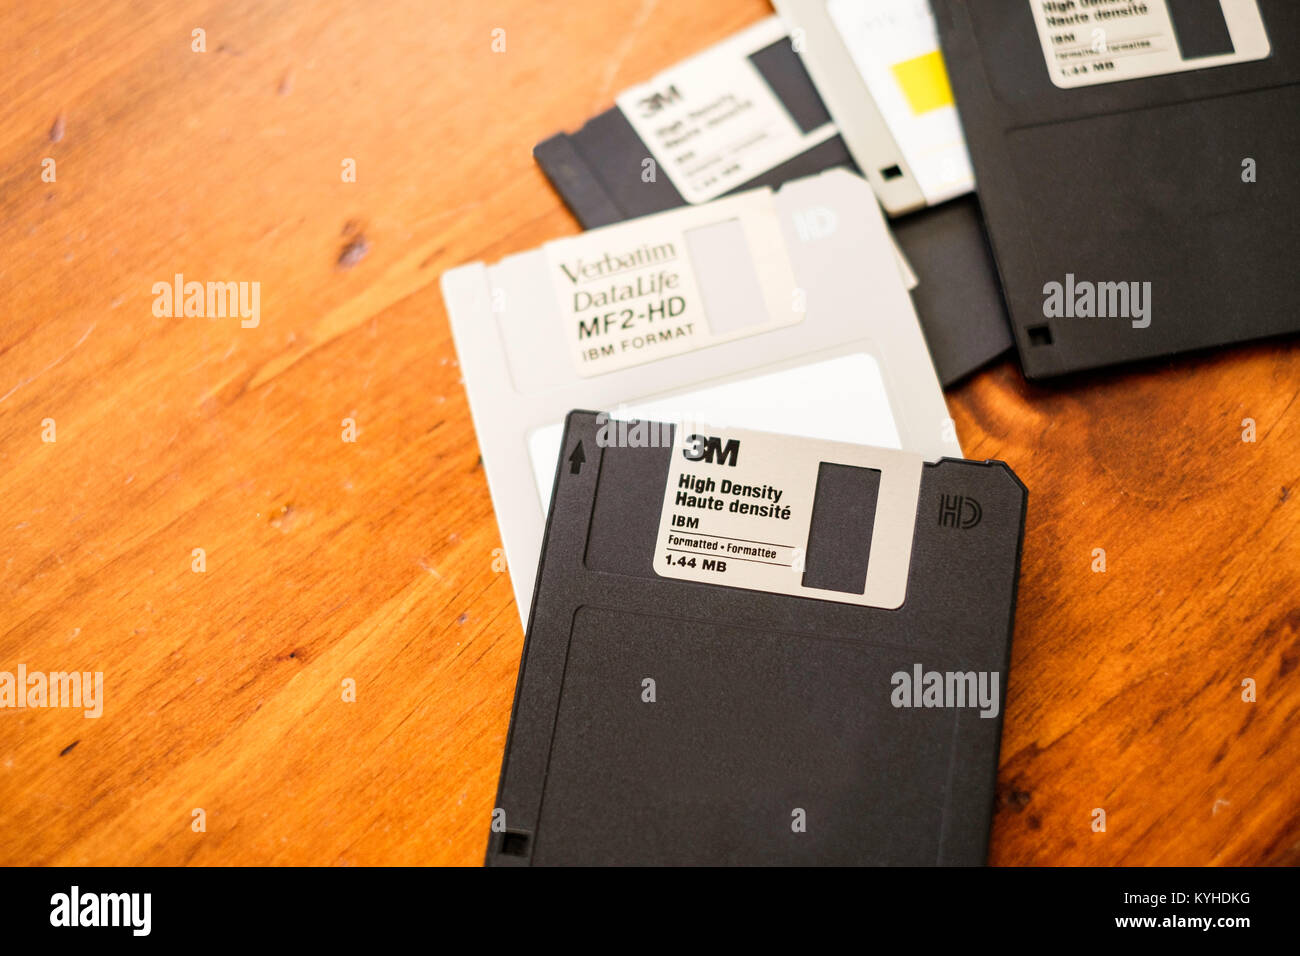 A pile of old 3M and Verbatum floppy discs on a wood table. USA. Stock Photo